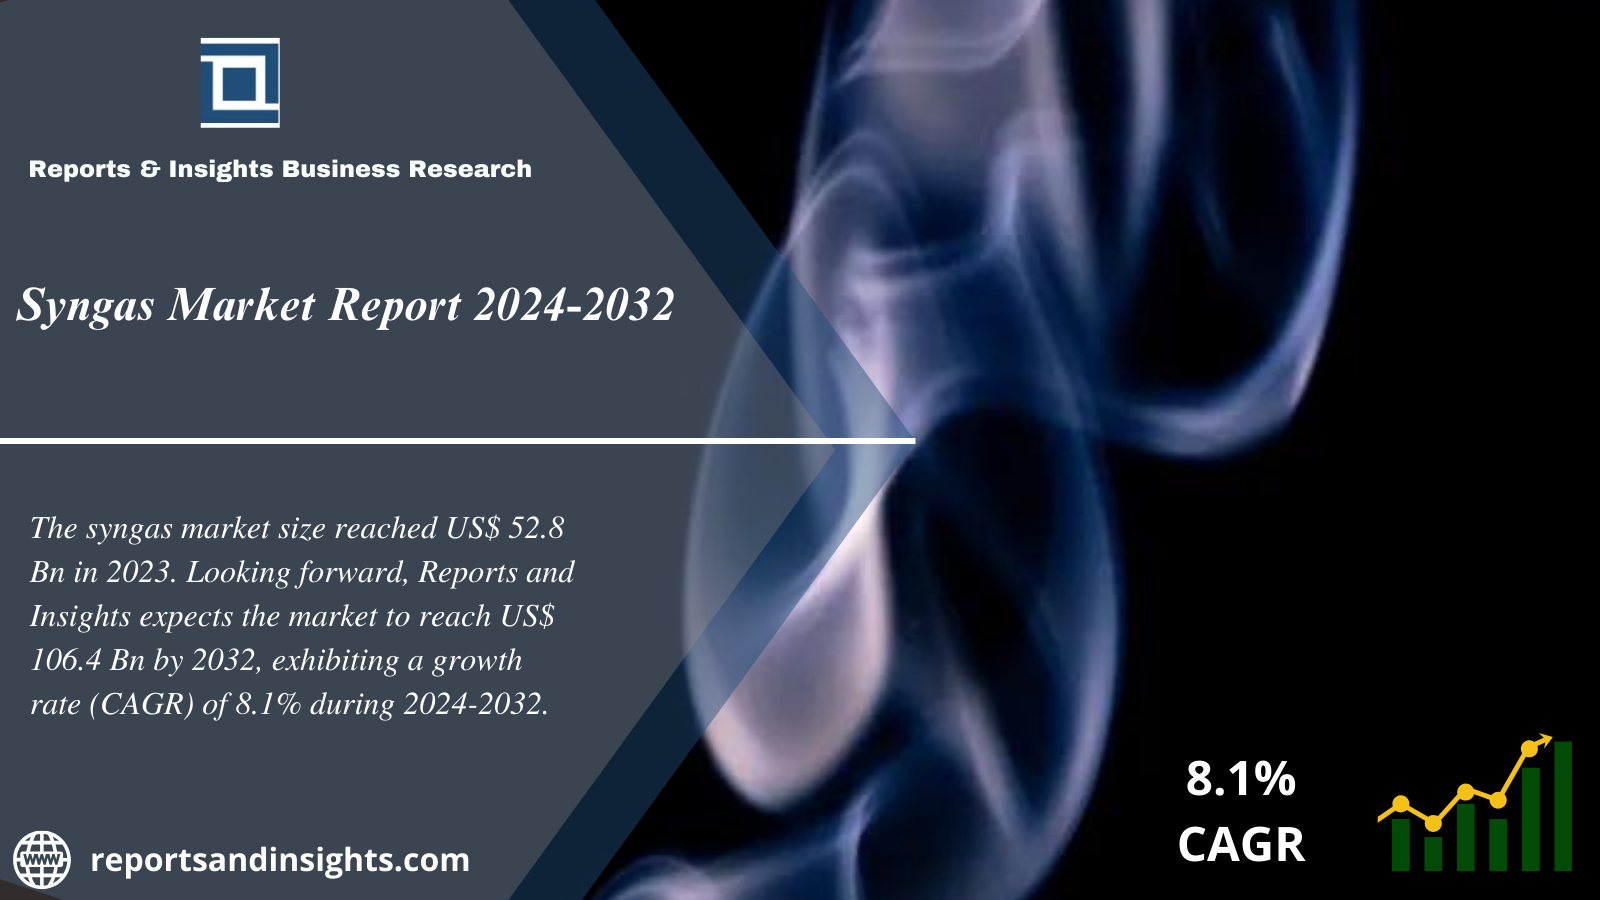 Syngas Market Share, Size, Growth, Trends, Demand and Forecast 2024 to 2032